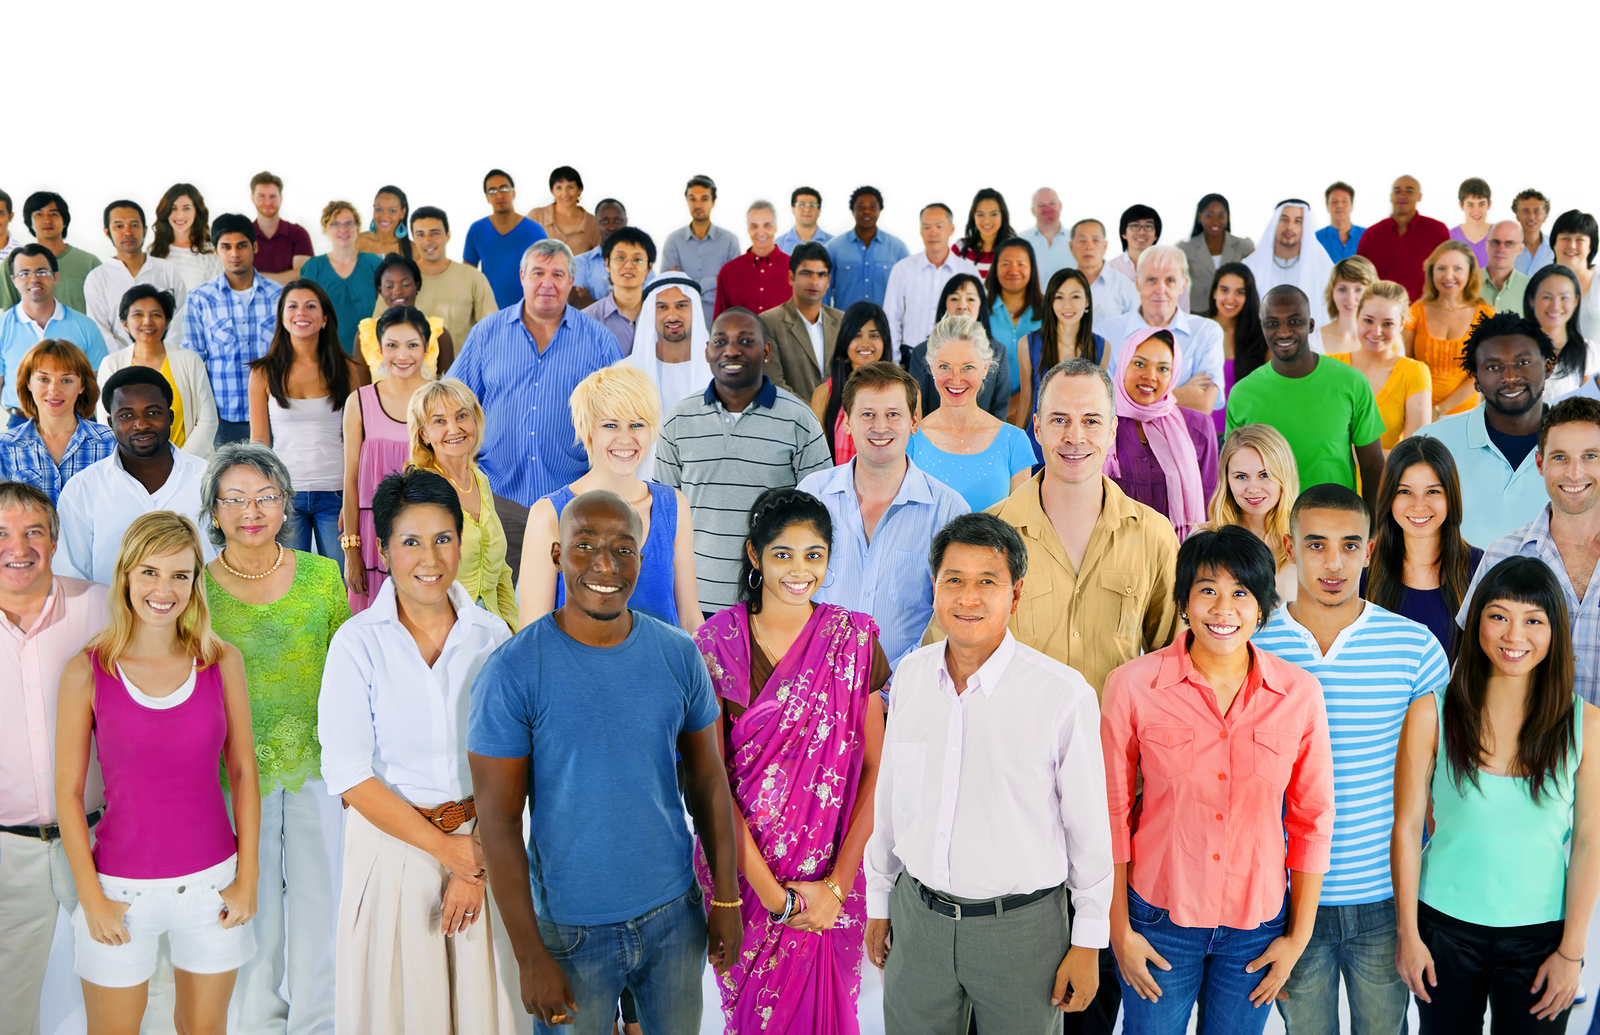 Large Multi-Ethnic Group of People.